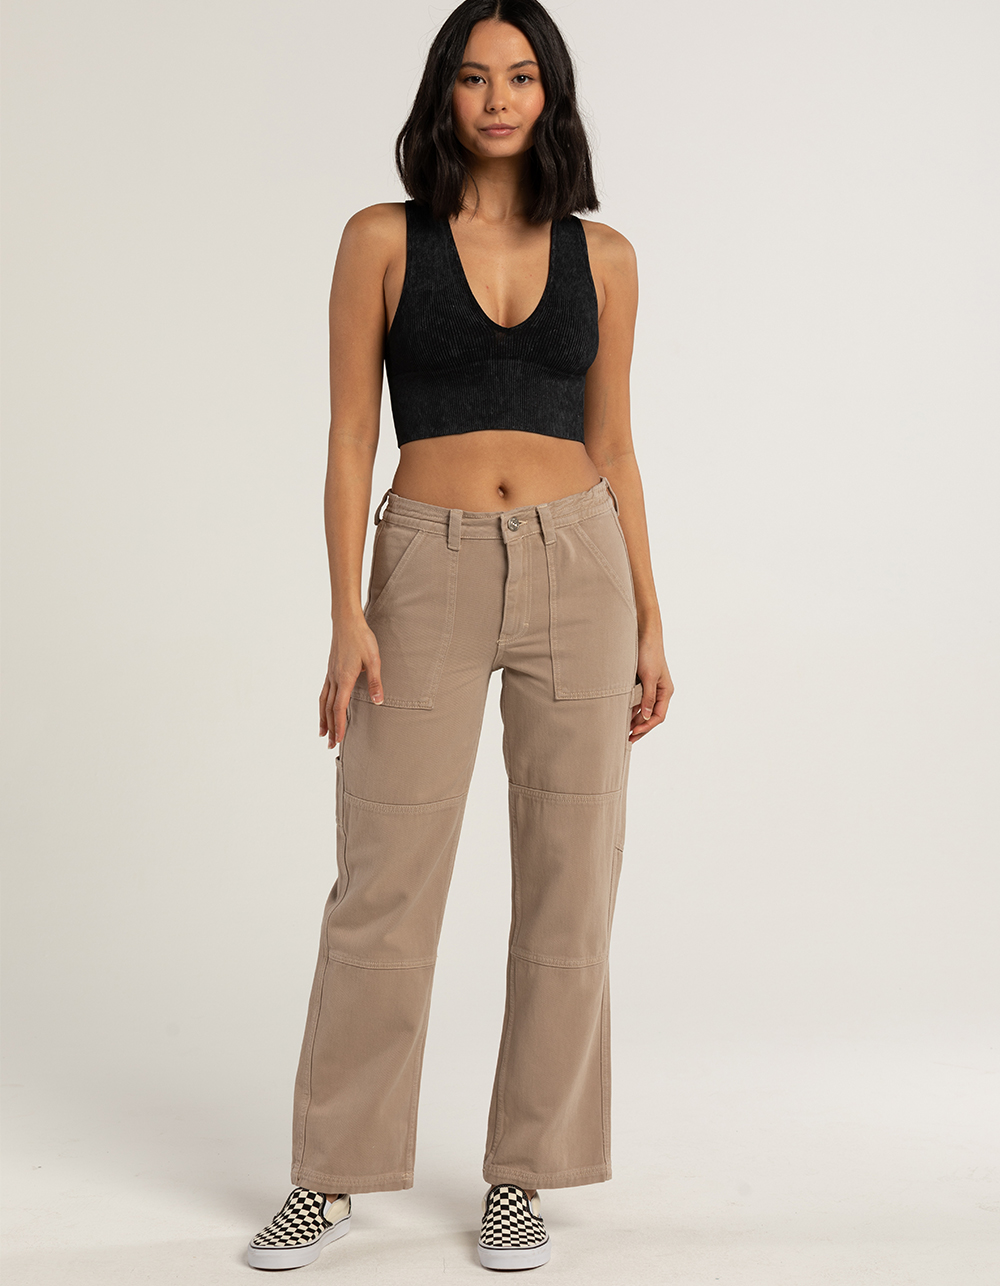 BDG Urban Outfitters Utility Skate Womens Pants